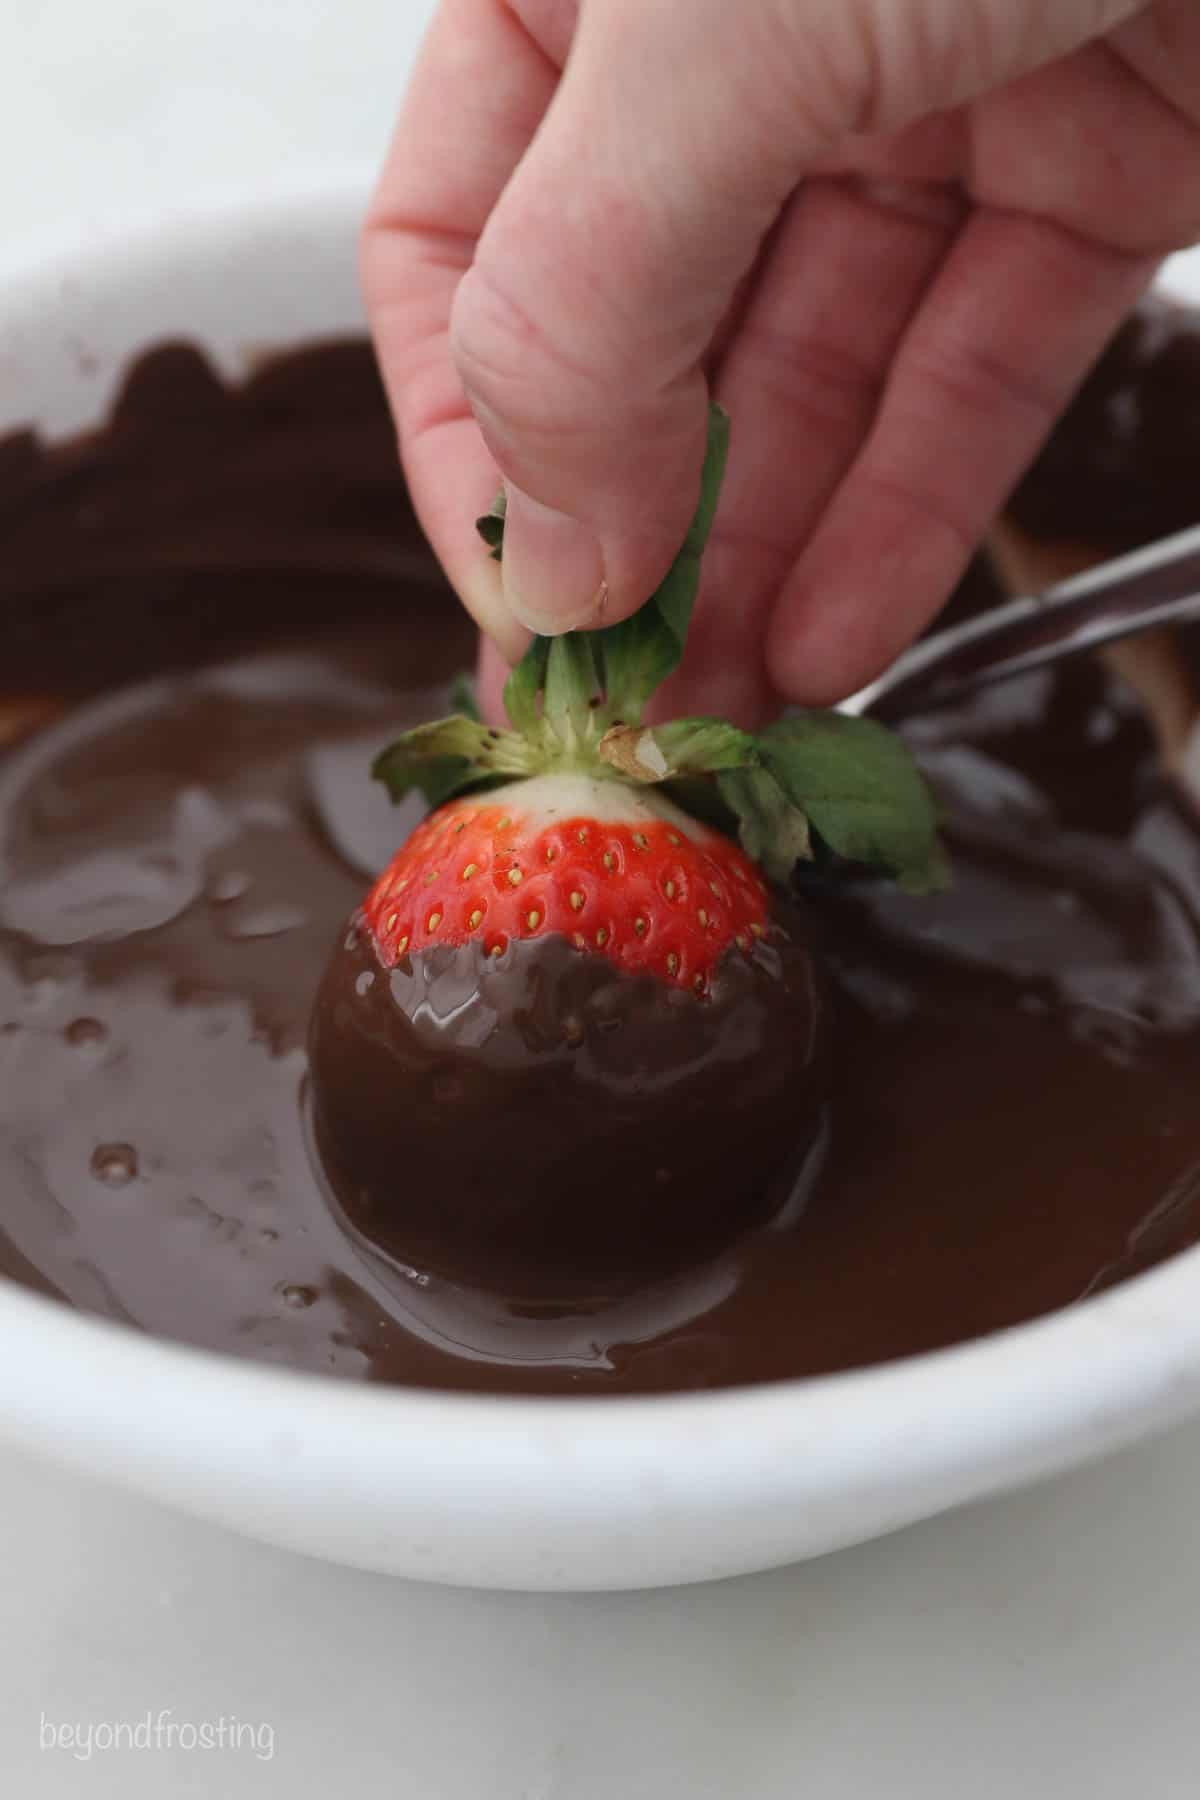 A hand dipping a strawberry into a bowl of melted chocolate